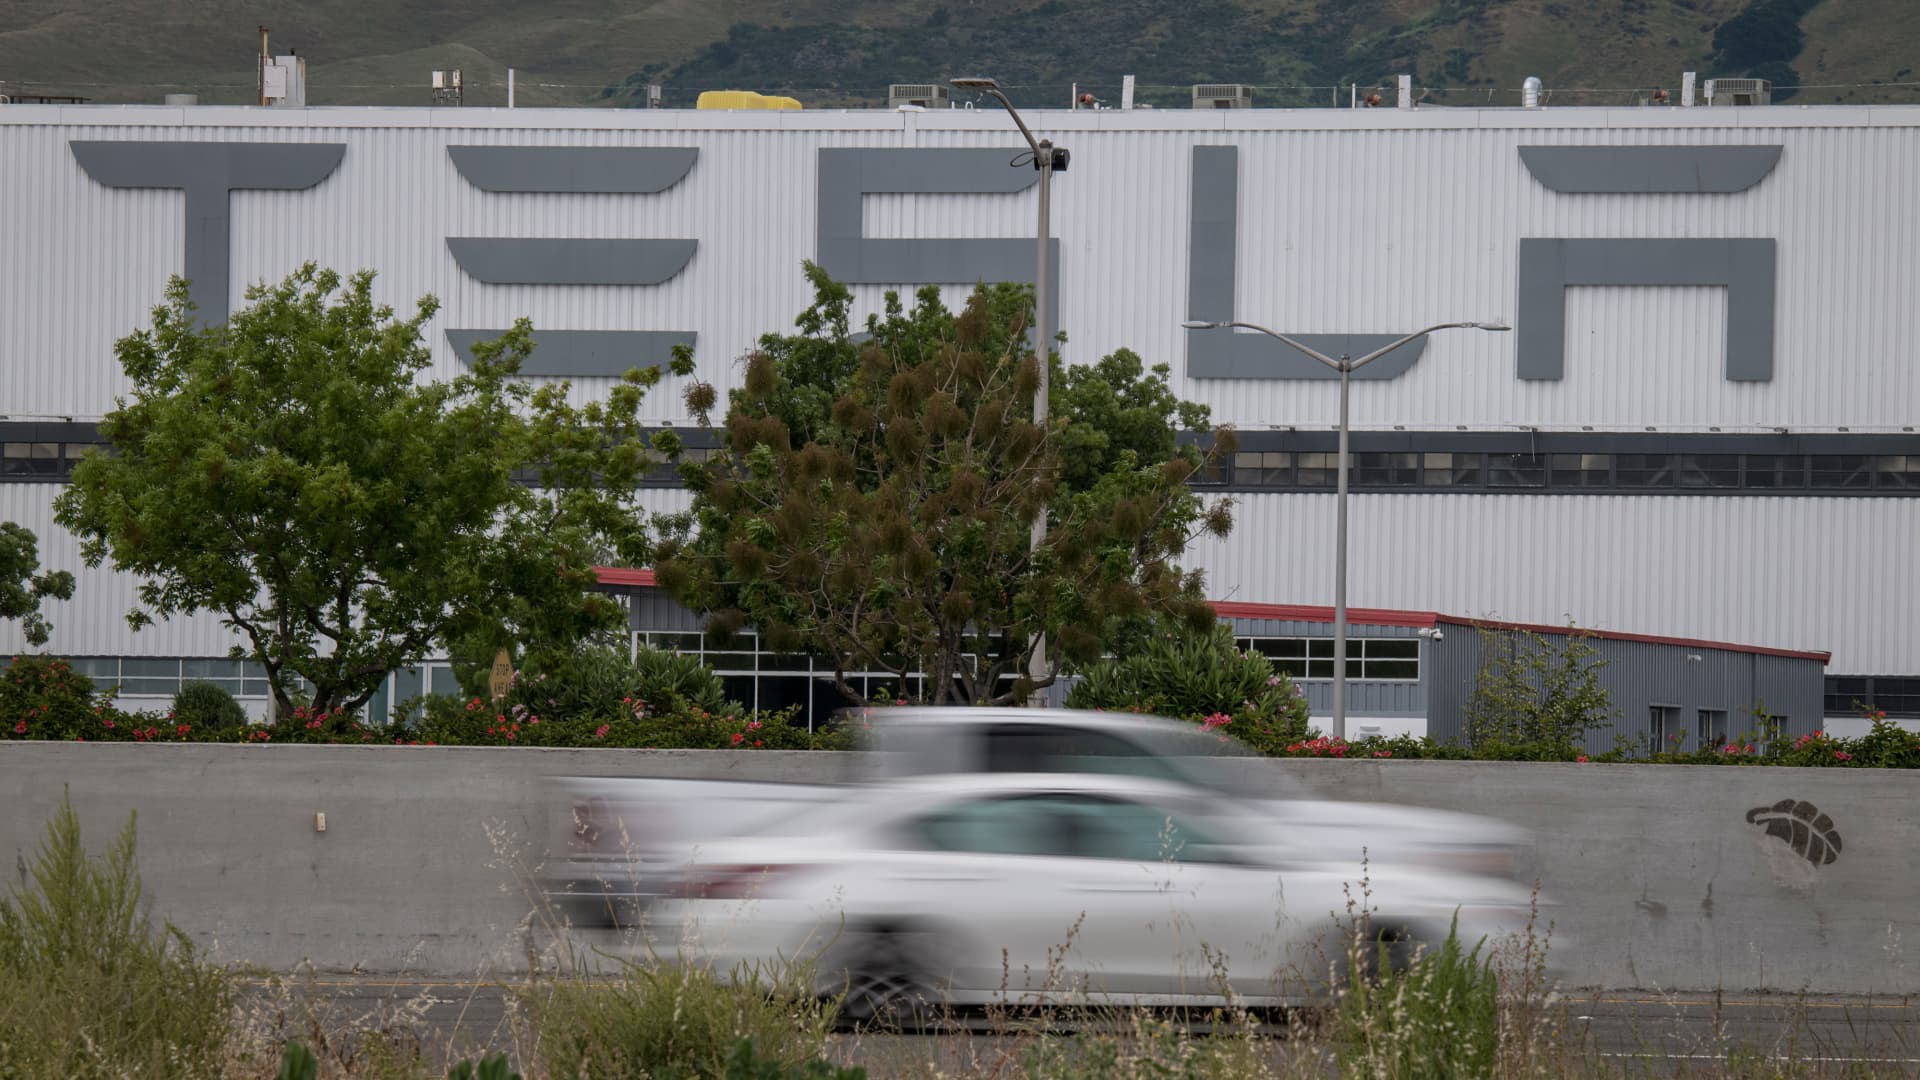 EEOC sues Tesla alleging widespread racist harassment of Black staff, retaliation against those who spoke out